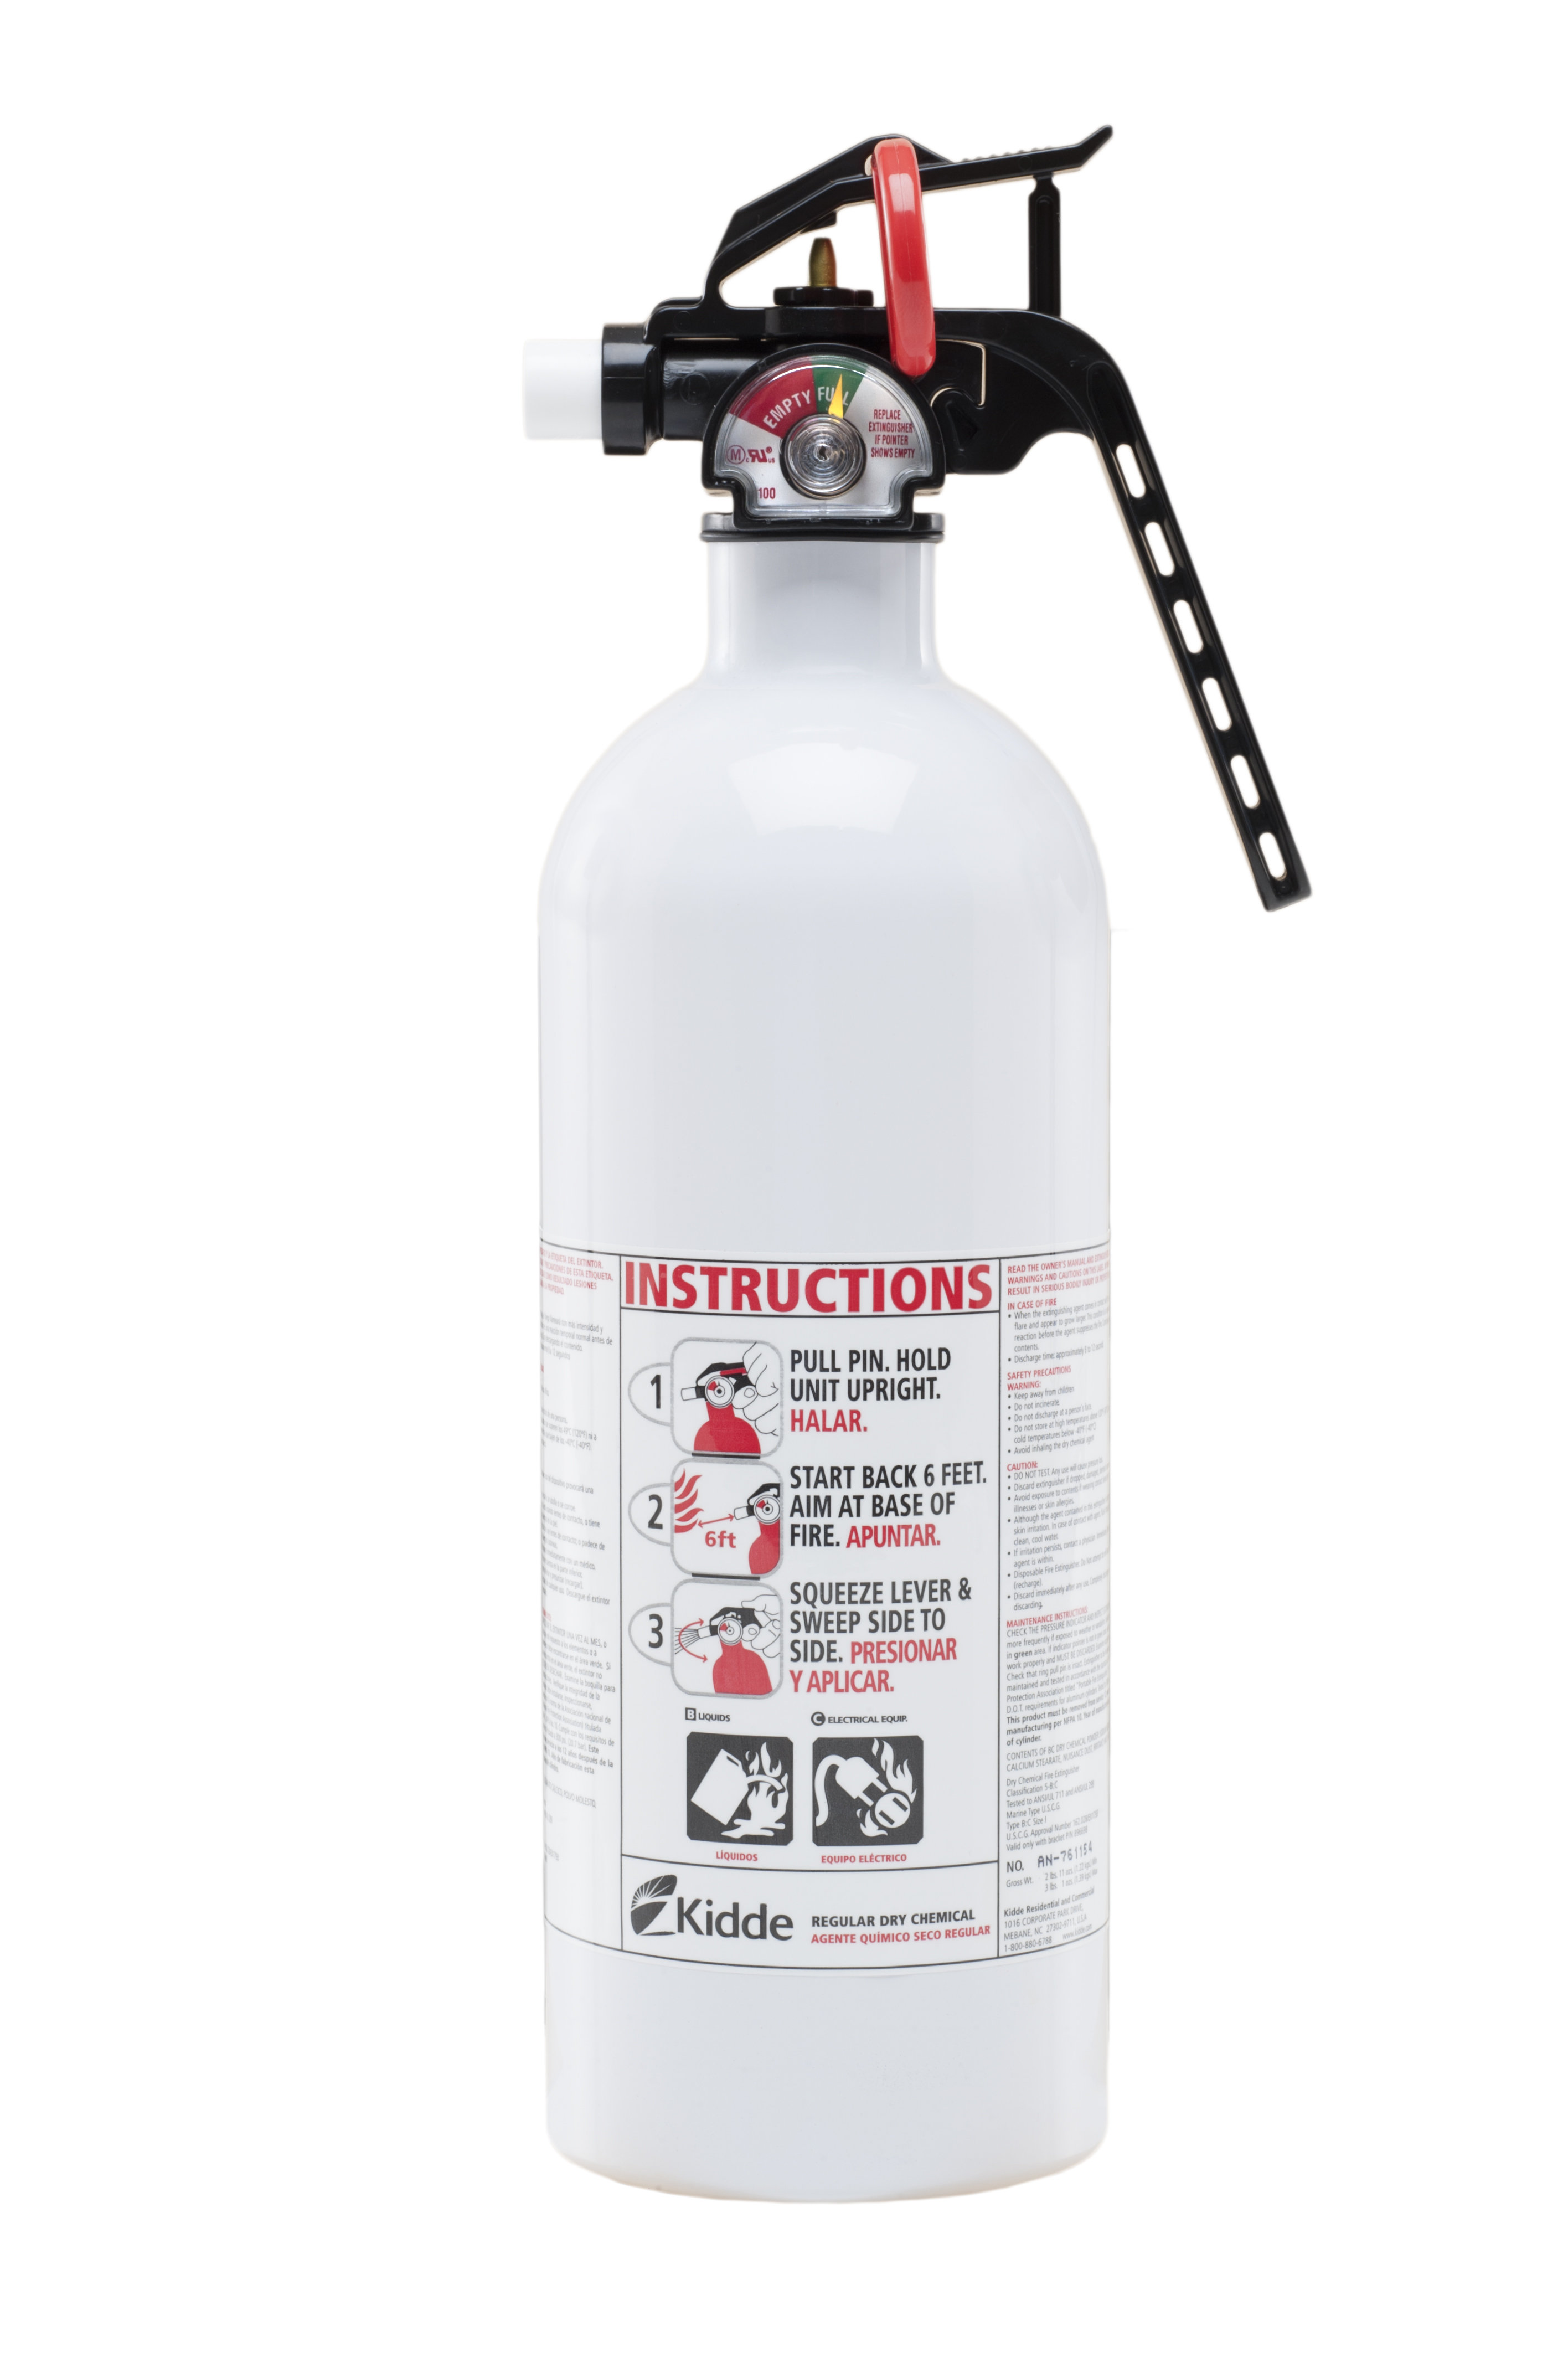 B-1 portable fire extinguisher